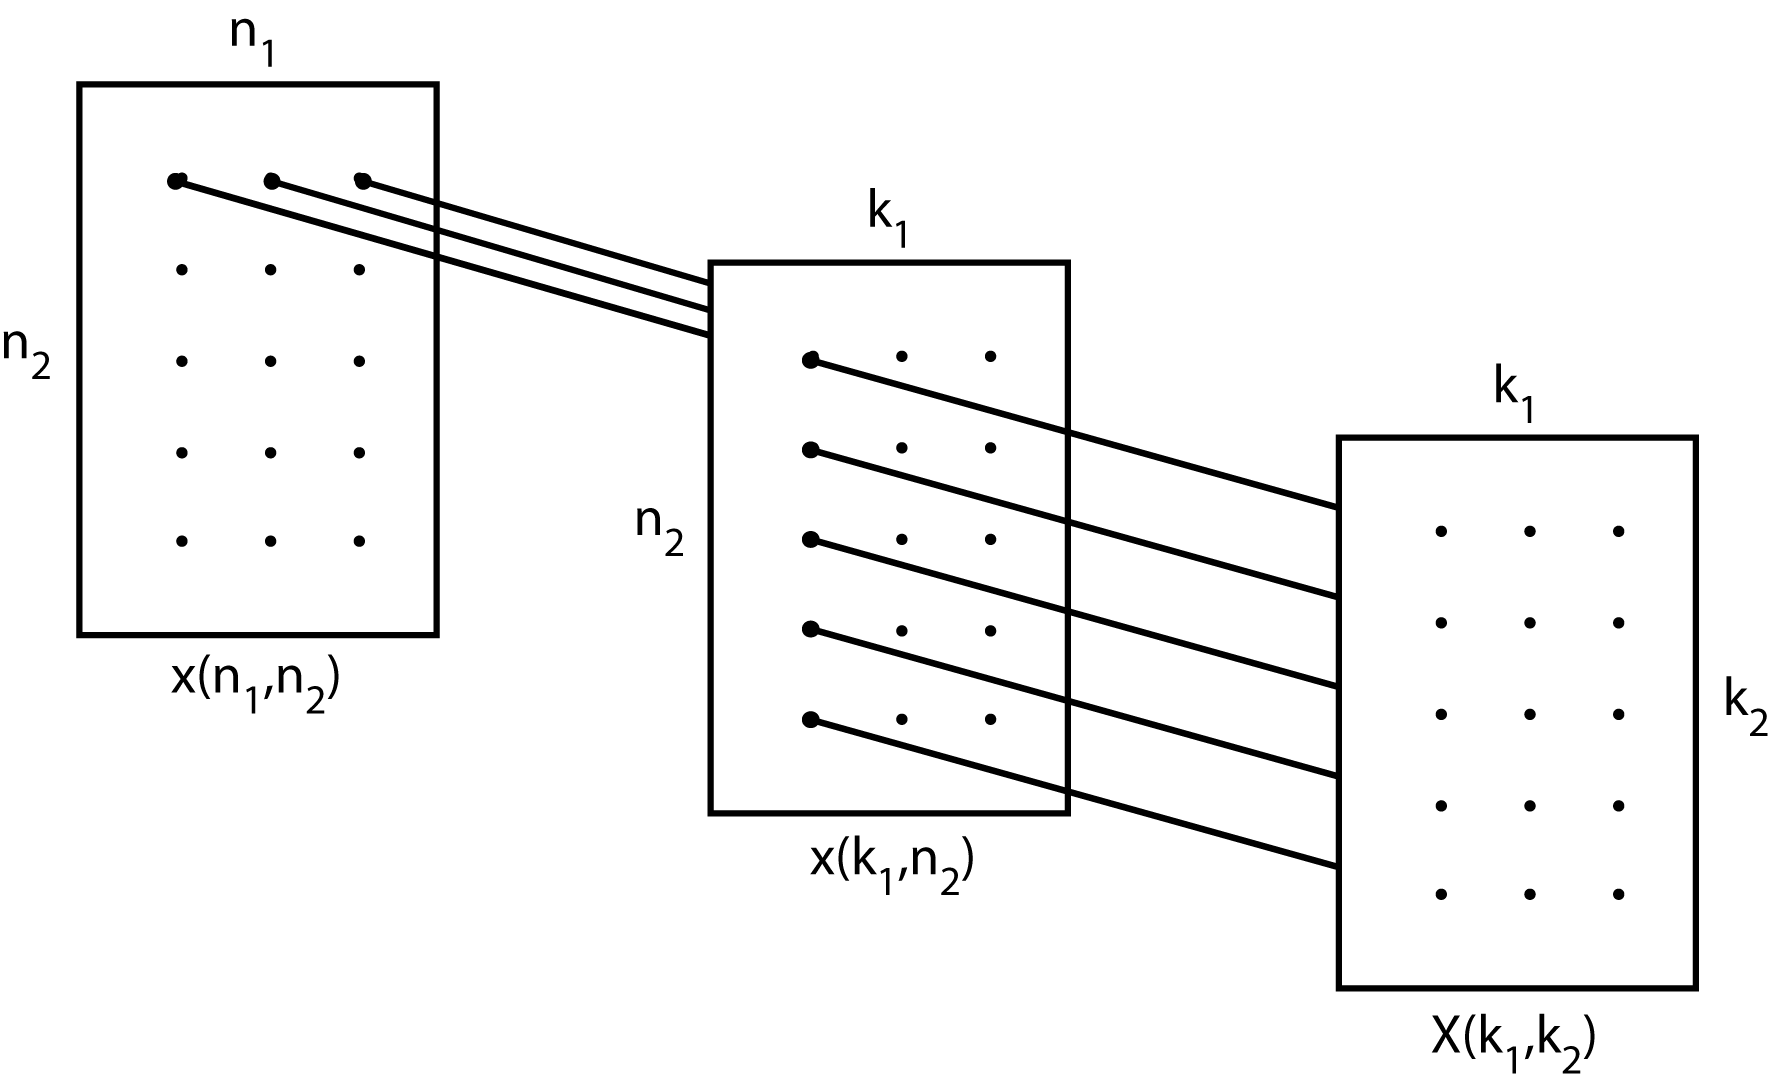 Three rectangles with a 3x5 array of dots. The first rectangle is labeled x(n_1,n_2) with lines extending from the first row of dots to the next rectangle. This rectangle is labeled x(k_1,n_2). Lines extend from the left-most column and end at the third rectangle labeled X(k_1,k_2).